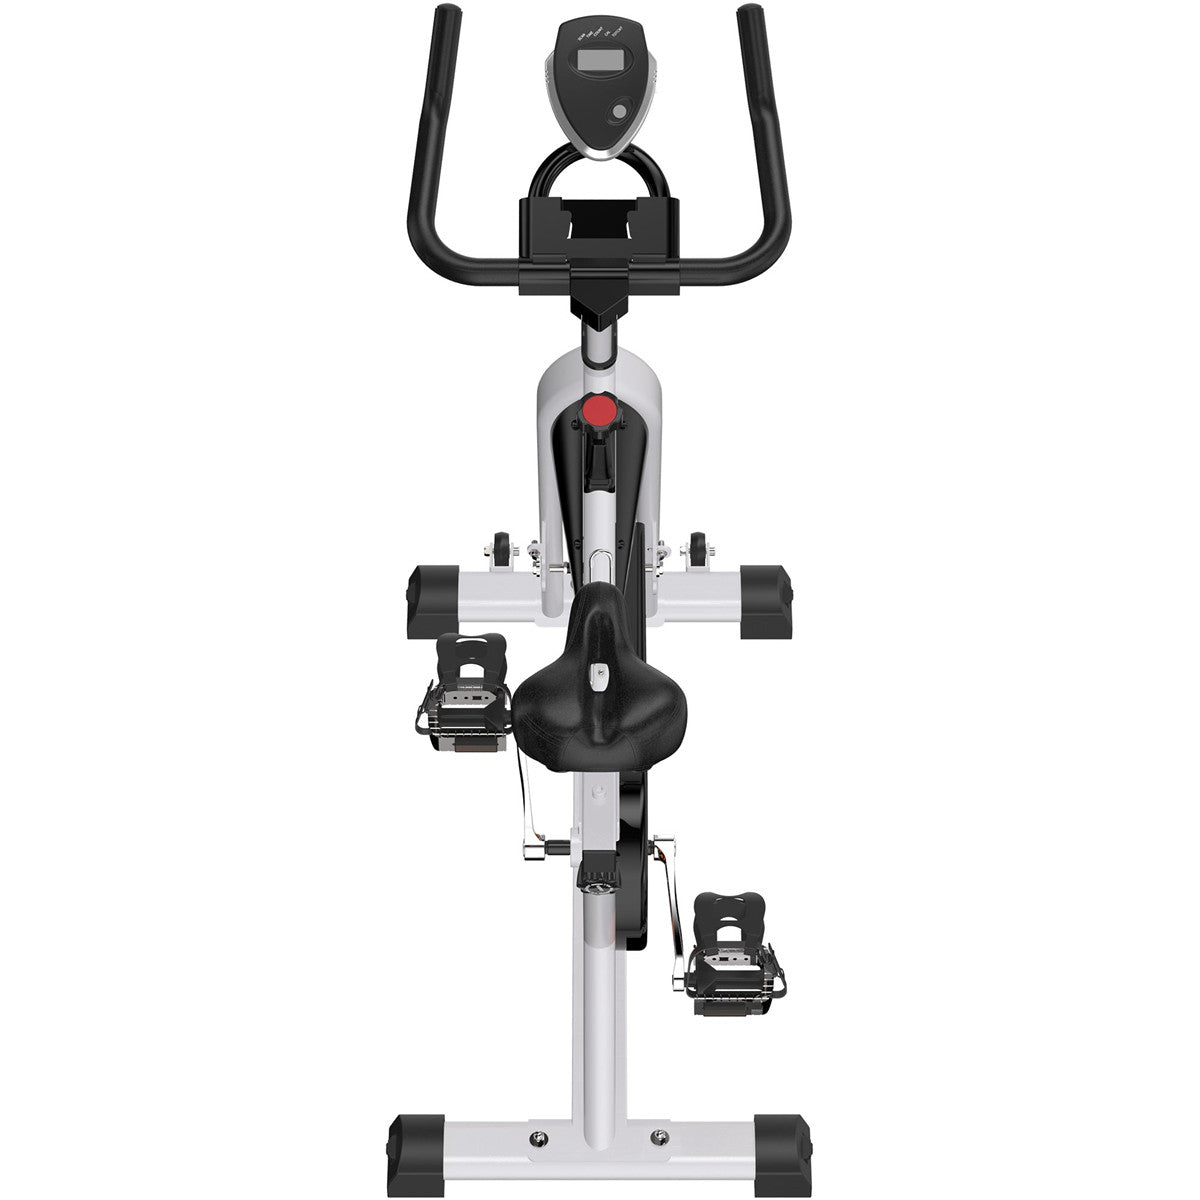 Indoor Cycling Bike Stationary | Belt Driven Smooth Exercise Bike with Oversize Soft Saddle